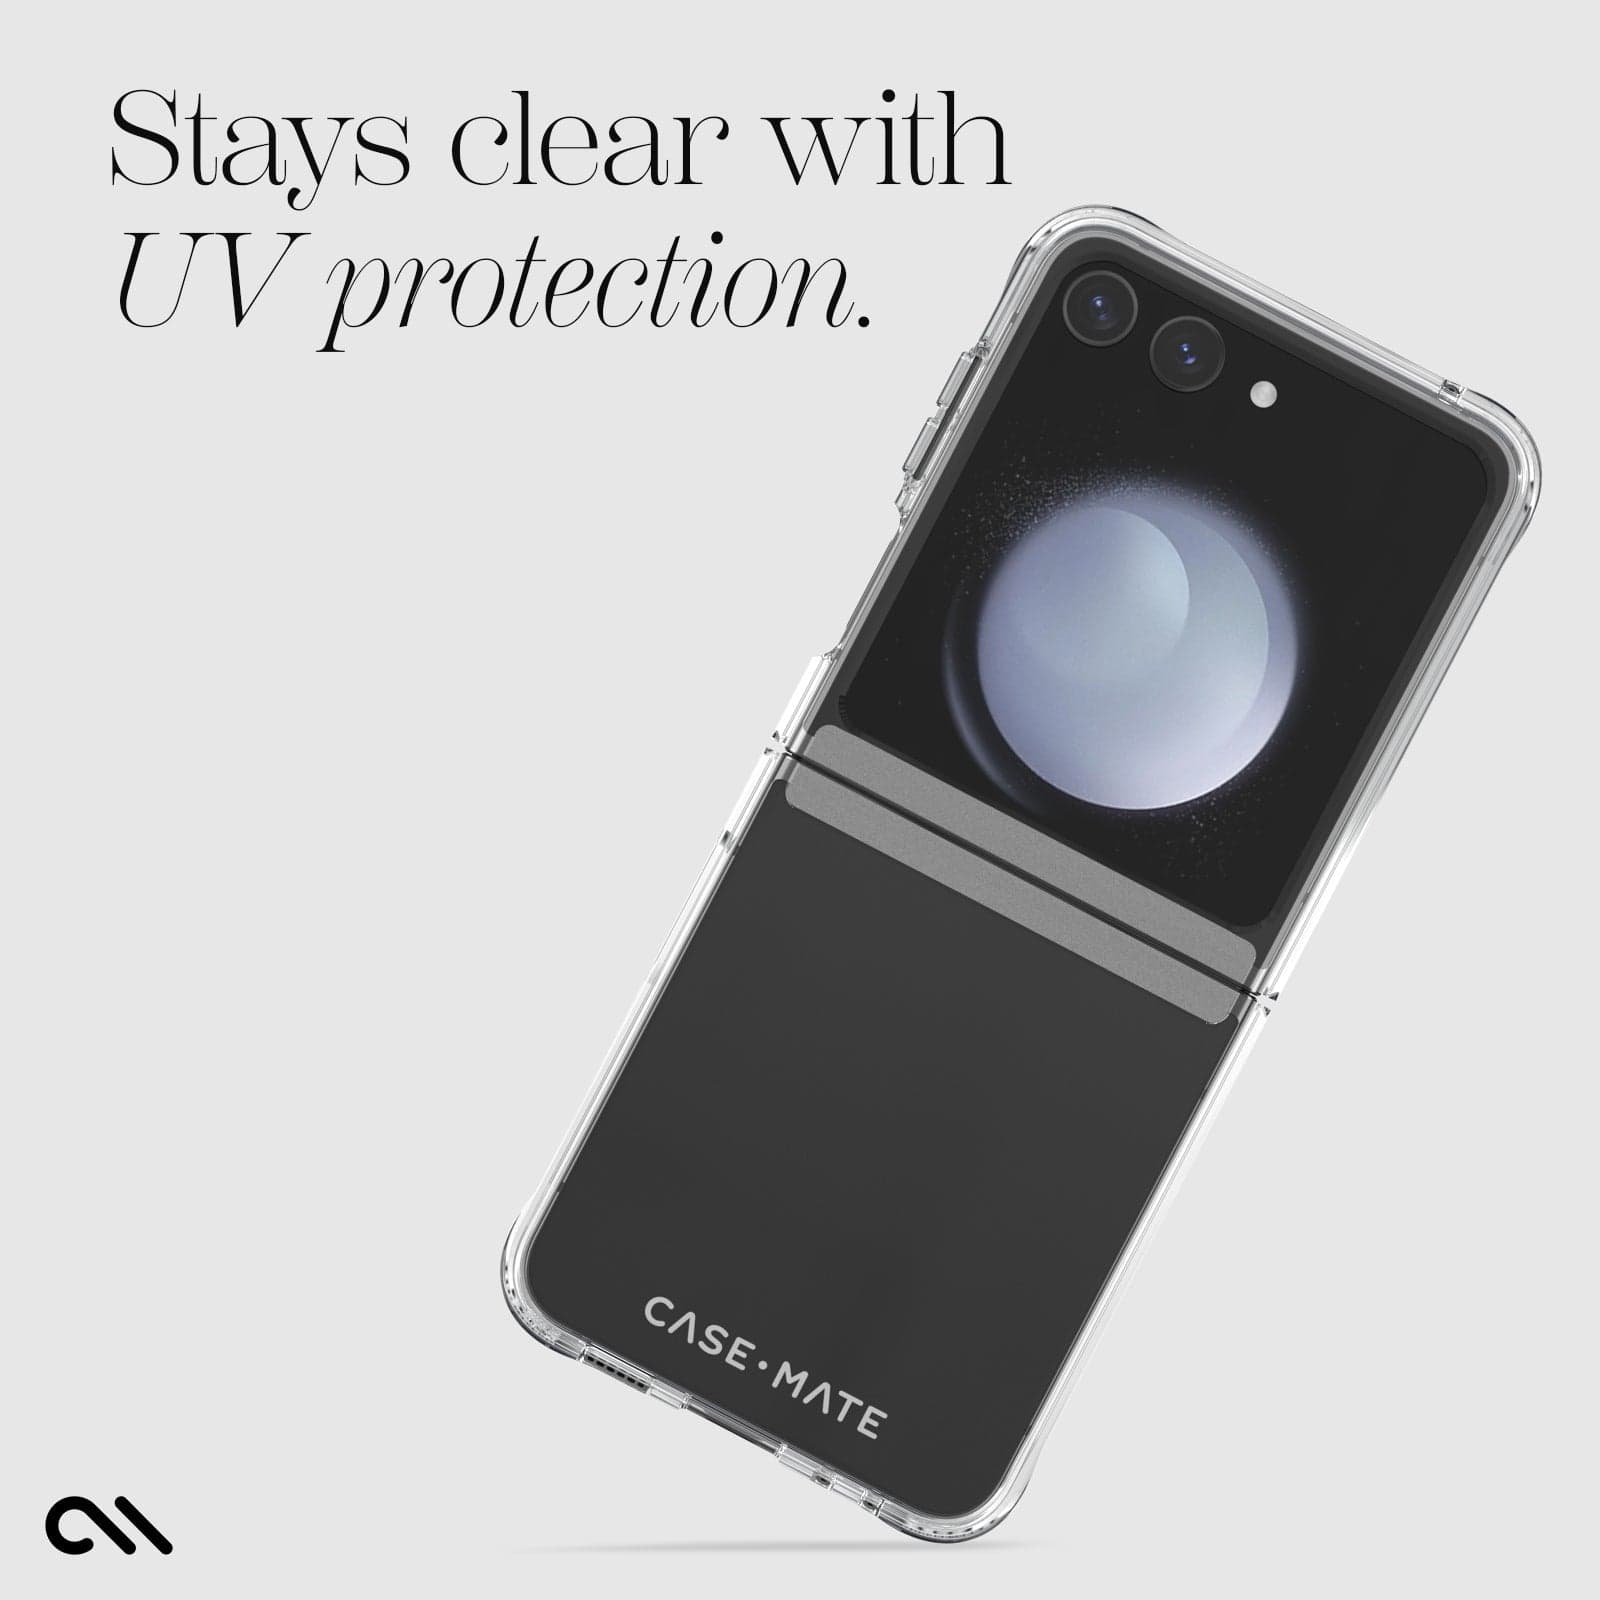 STAYS CLEAR WITH UV PROTECTION